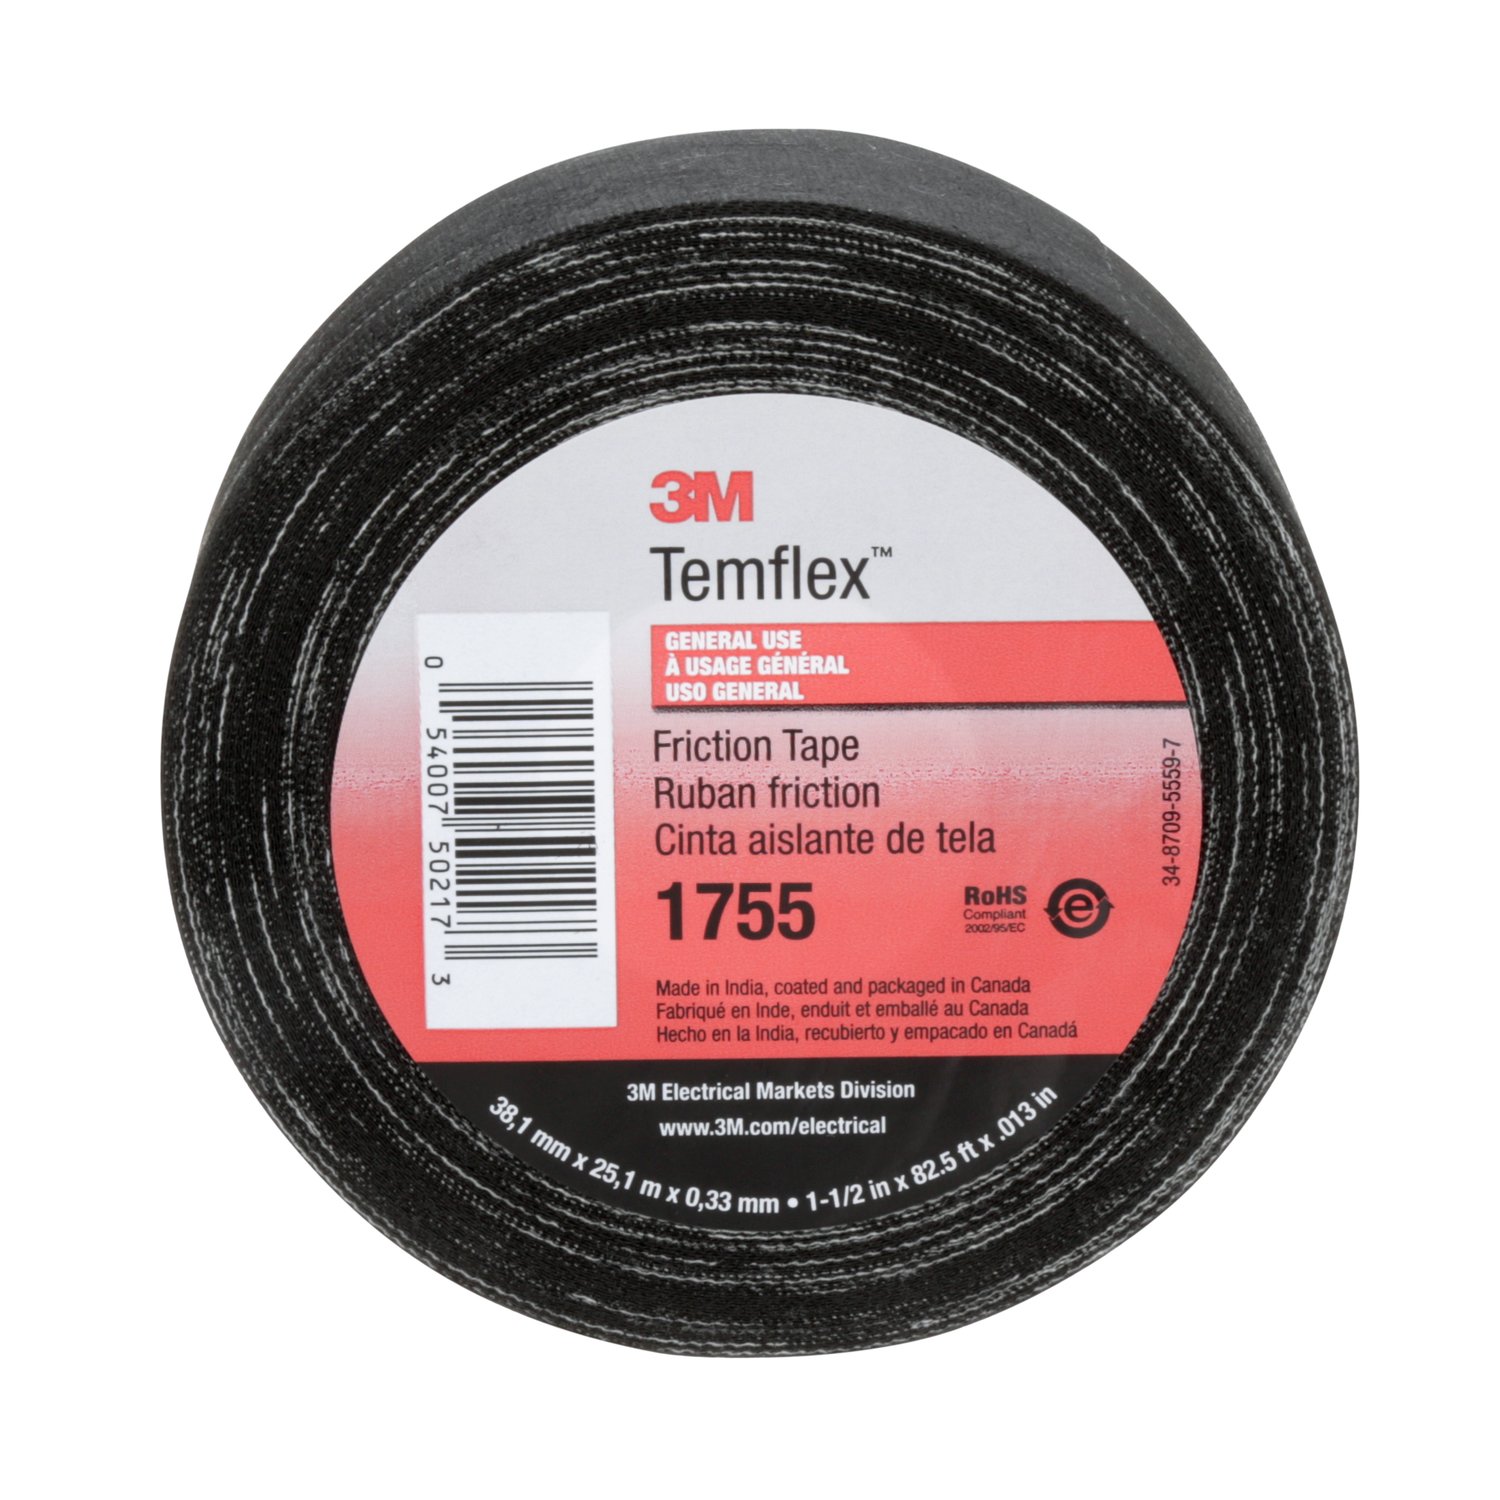 3M Super Tough Heavy Duty All Weather Black Rubberized Duct Tape 1.88-in x  30 Yard(s) (3-Pack) in the Duct Tape department at